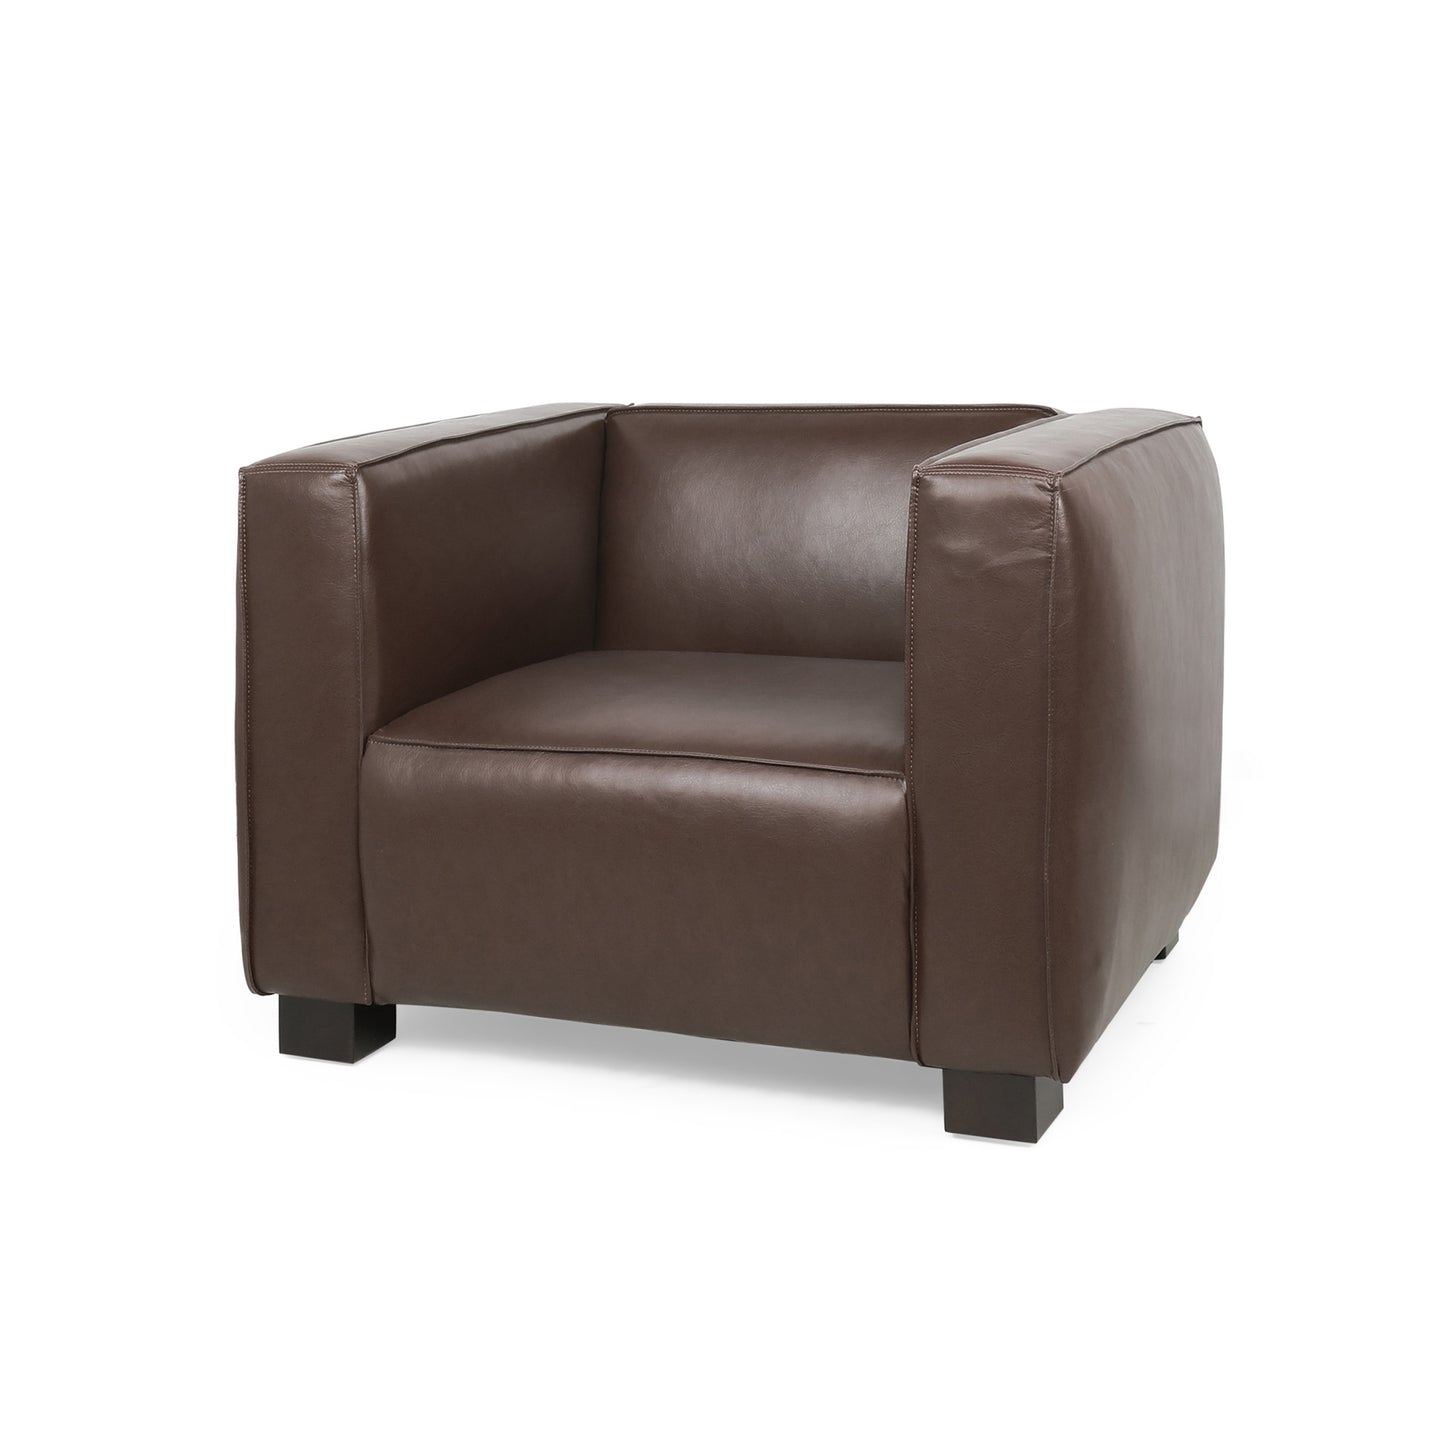 Minkler Contemporary Faux Leather Club Chair